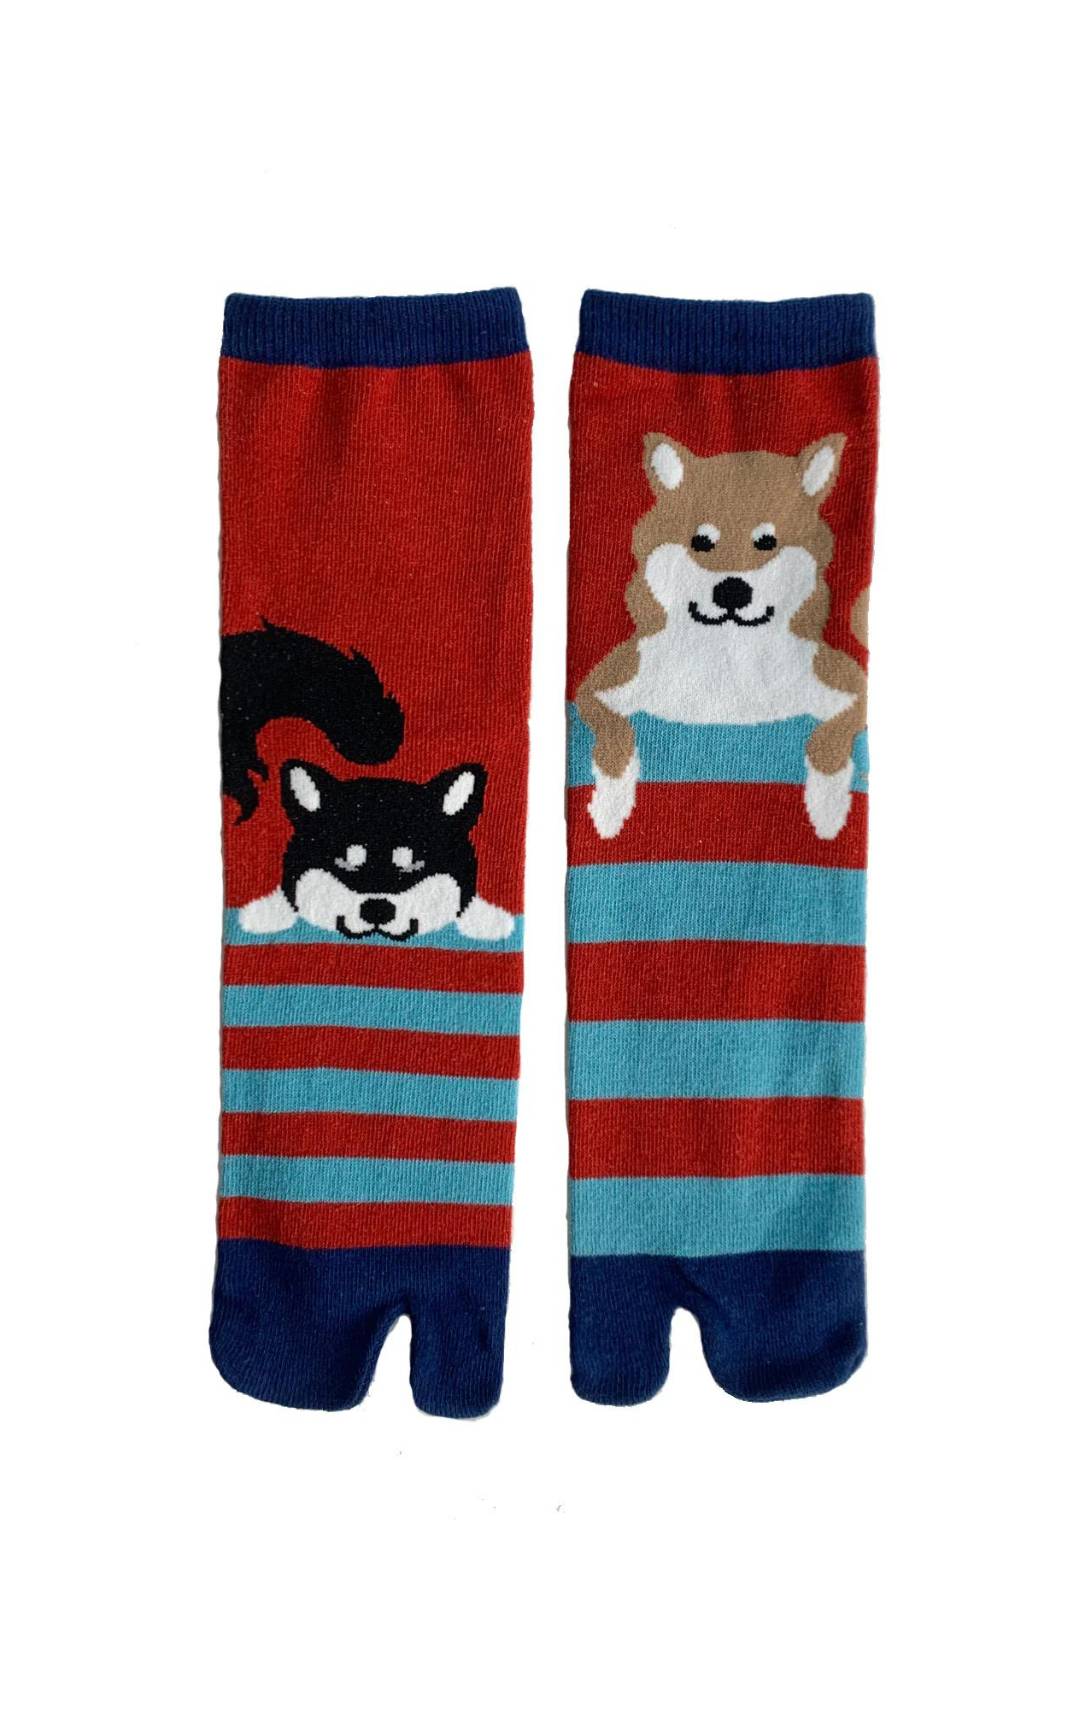 Red color of NINJA SOCKS' Shiba Inu Tabi Socks product, with the pattern of Black Shiba and Red Shiba on the right and left